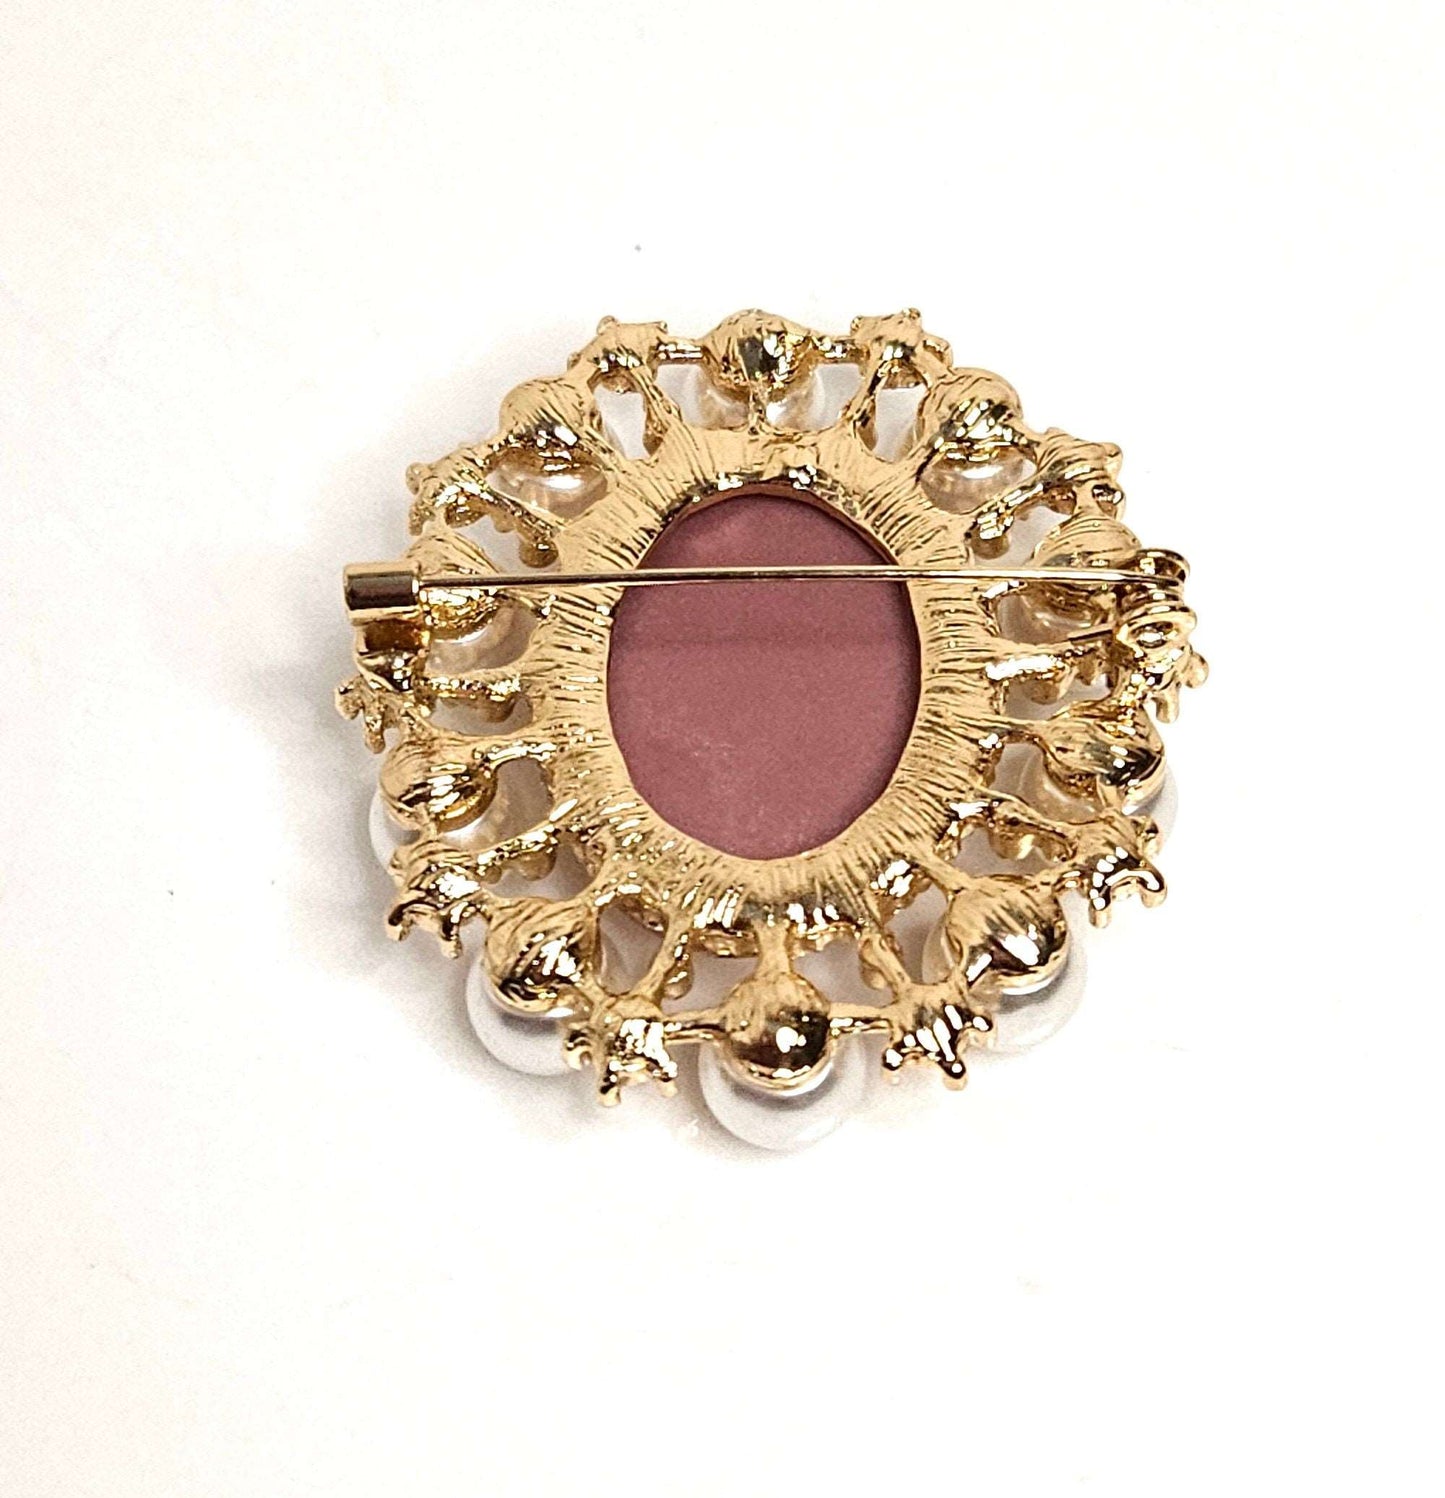 Gorgeous Pink Gold Cameo Brooch, Victorian Pearl Lady Brooch, Crystal Jewelry, Stylish Cameo Pin, Brooches For Women